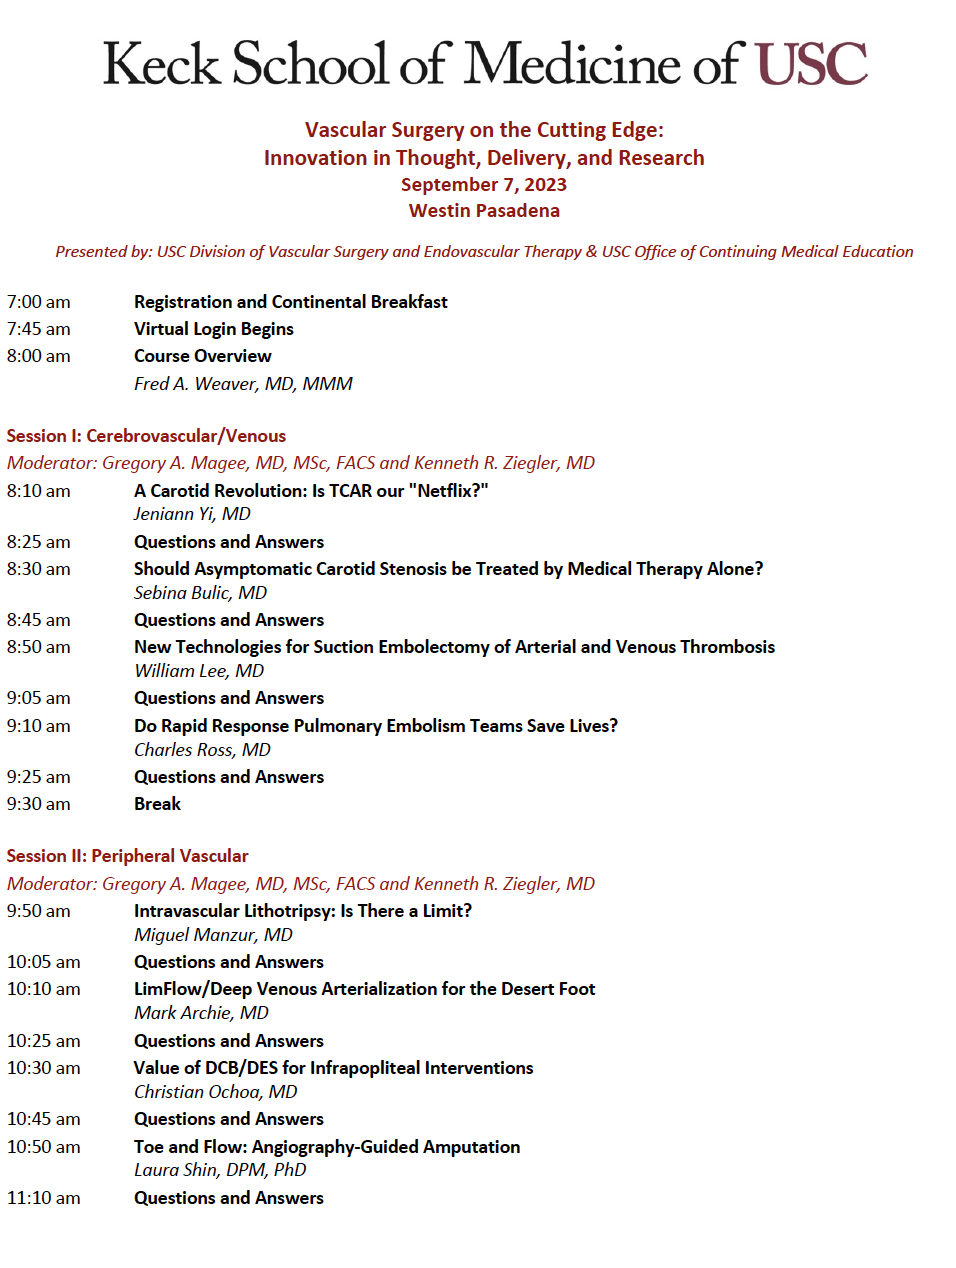 27th Annual Max R. Gaspar MD Symposium: Vascular Surgery on the Cutting Edge: Innovation in Thought, Delivery, and Research Banner